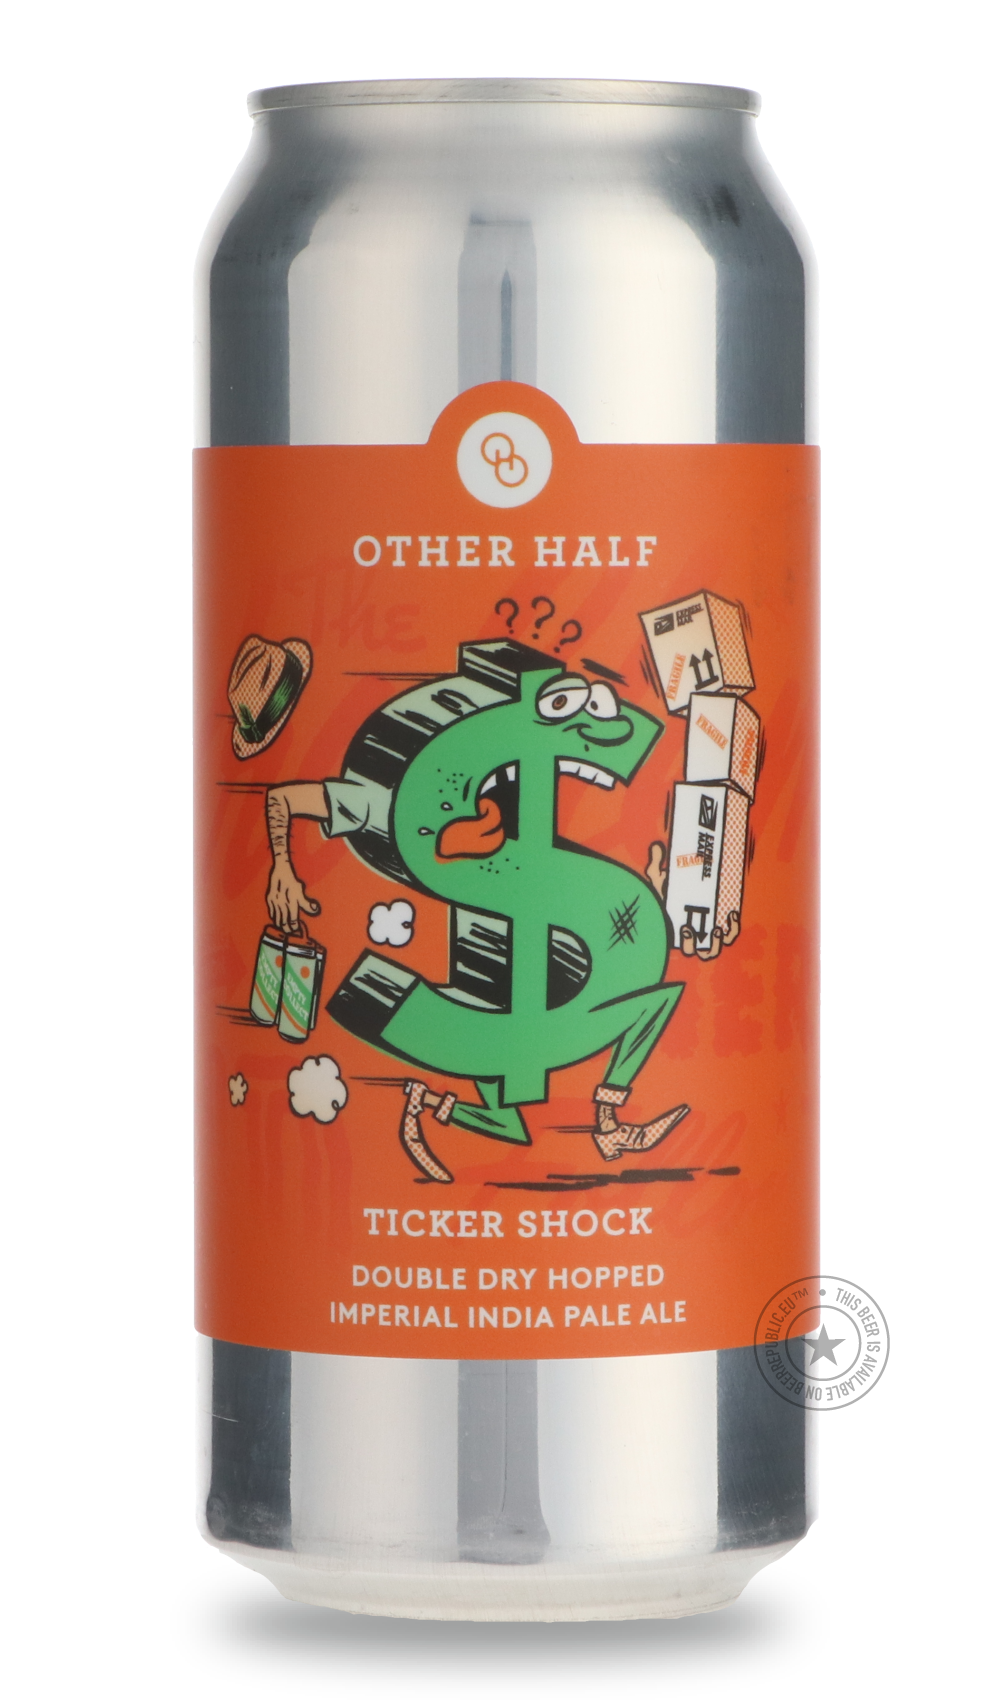 -Other Half- Ticker Shock-IPA- Only @ Beer Republic - The best online beer store for American & Canadian craft beer - Buy beer online from the USA and Canada - Bier online kopen - Amerikaans bier kopen - Craft beer store - Craft beer kopen - Amerikanisch bier kaufen - Bier online kaufen - Acheter biere online - IPA - Stout - Porter - New England IPA - Hazy IPA - Imperial Stout - Barrel Aged - Barrel Aged Imperial Stout - Brown - Dark beer - Blond - Blonde - Pilsner - Lager - Wheat - Weizen - Amber - Barley 